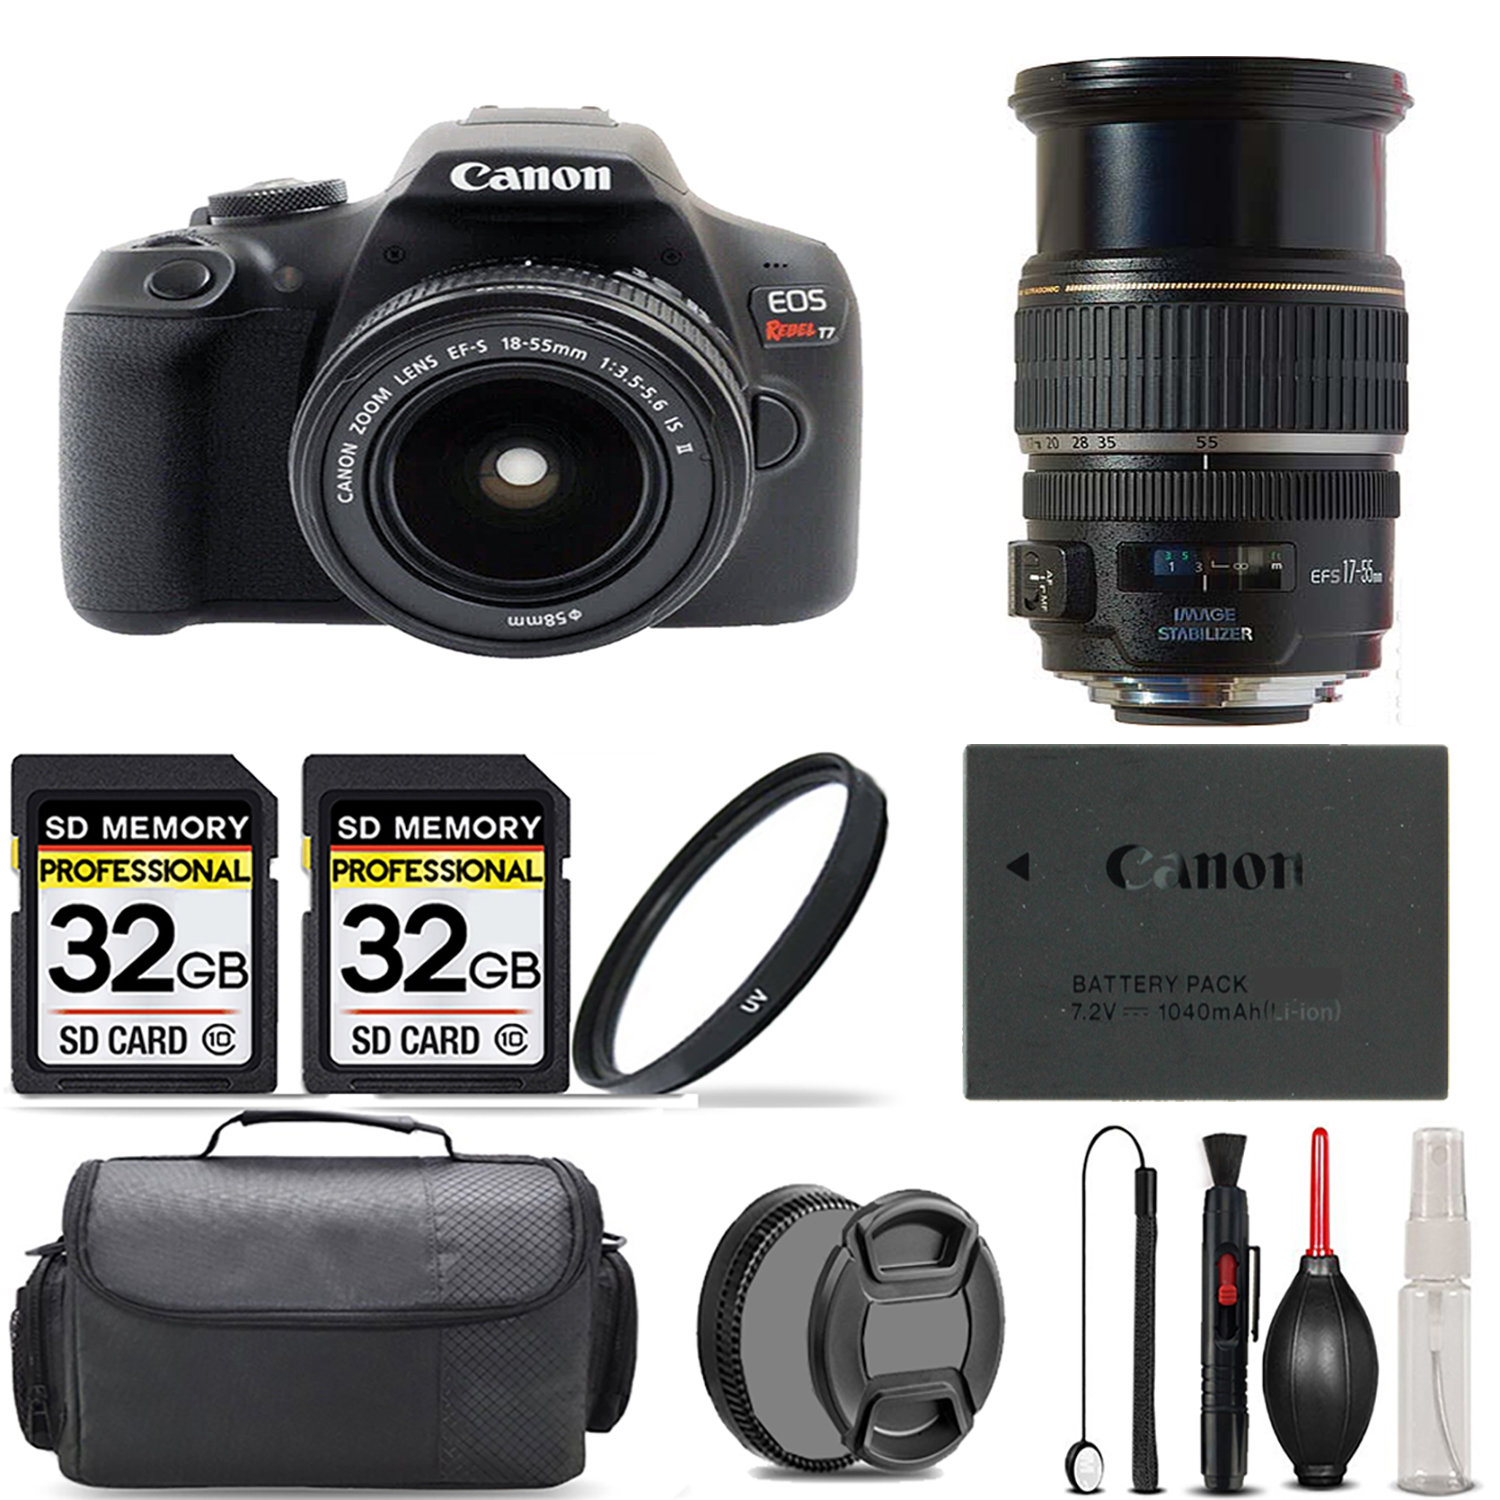 EOS Rebel T7 with 18-55mm Lens + 17-55mm IS USM Lens + UV Filter + 64GB + Bag *FREE SHIPPING*